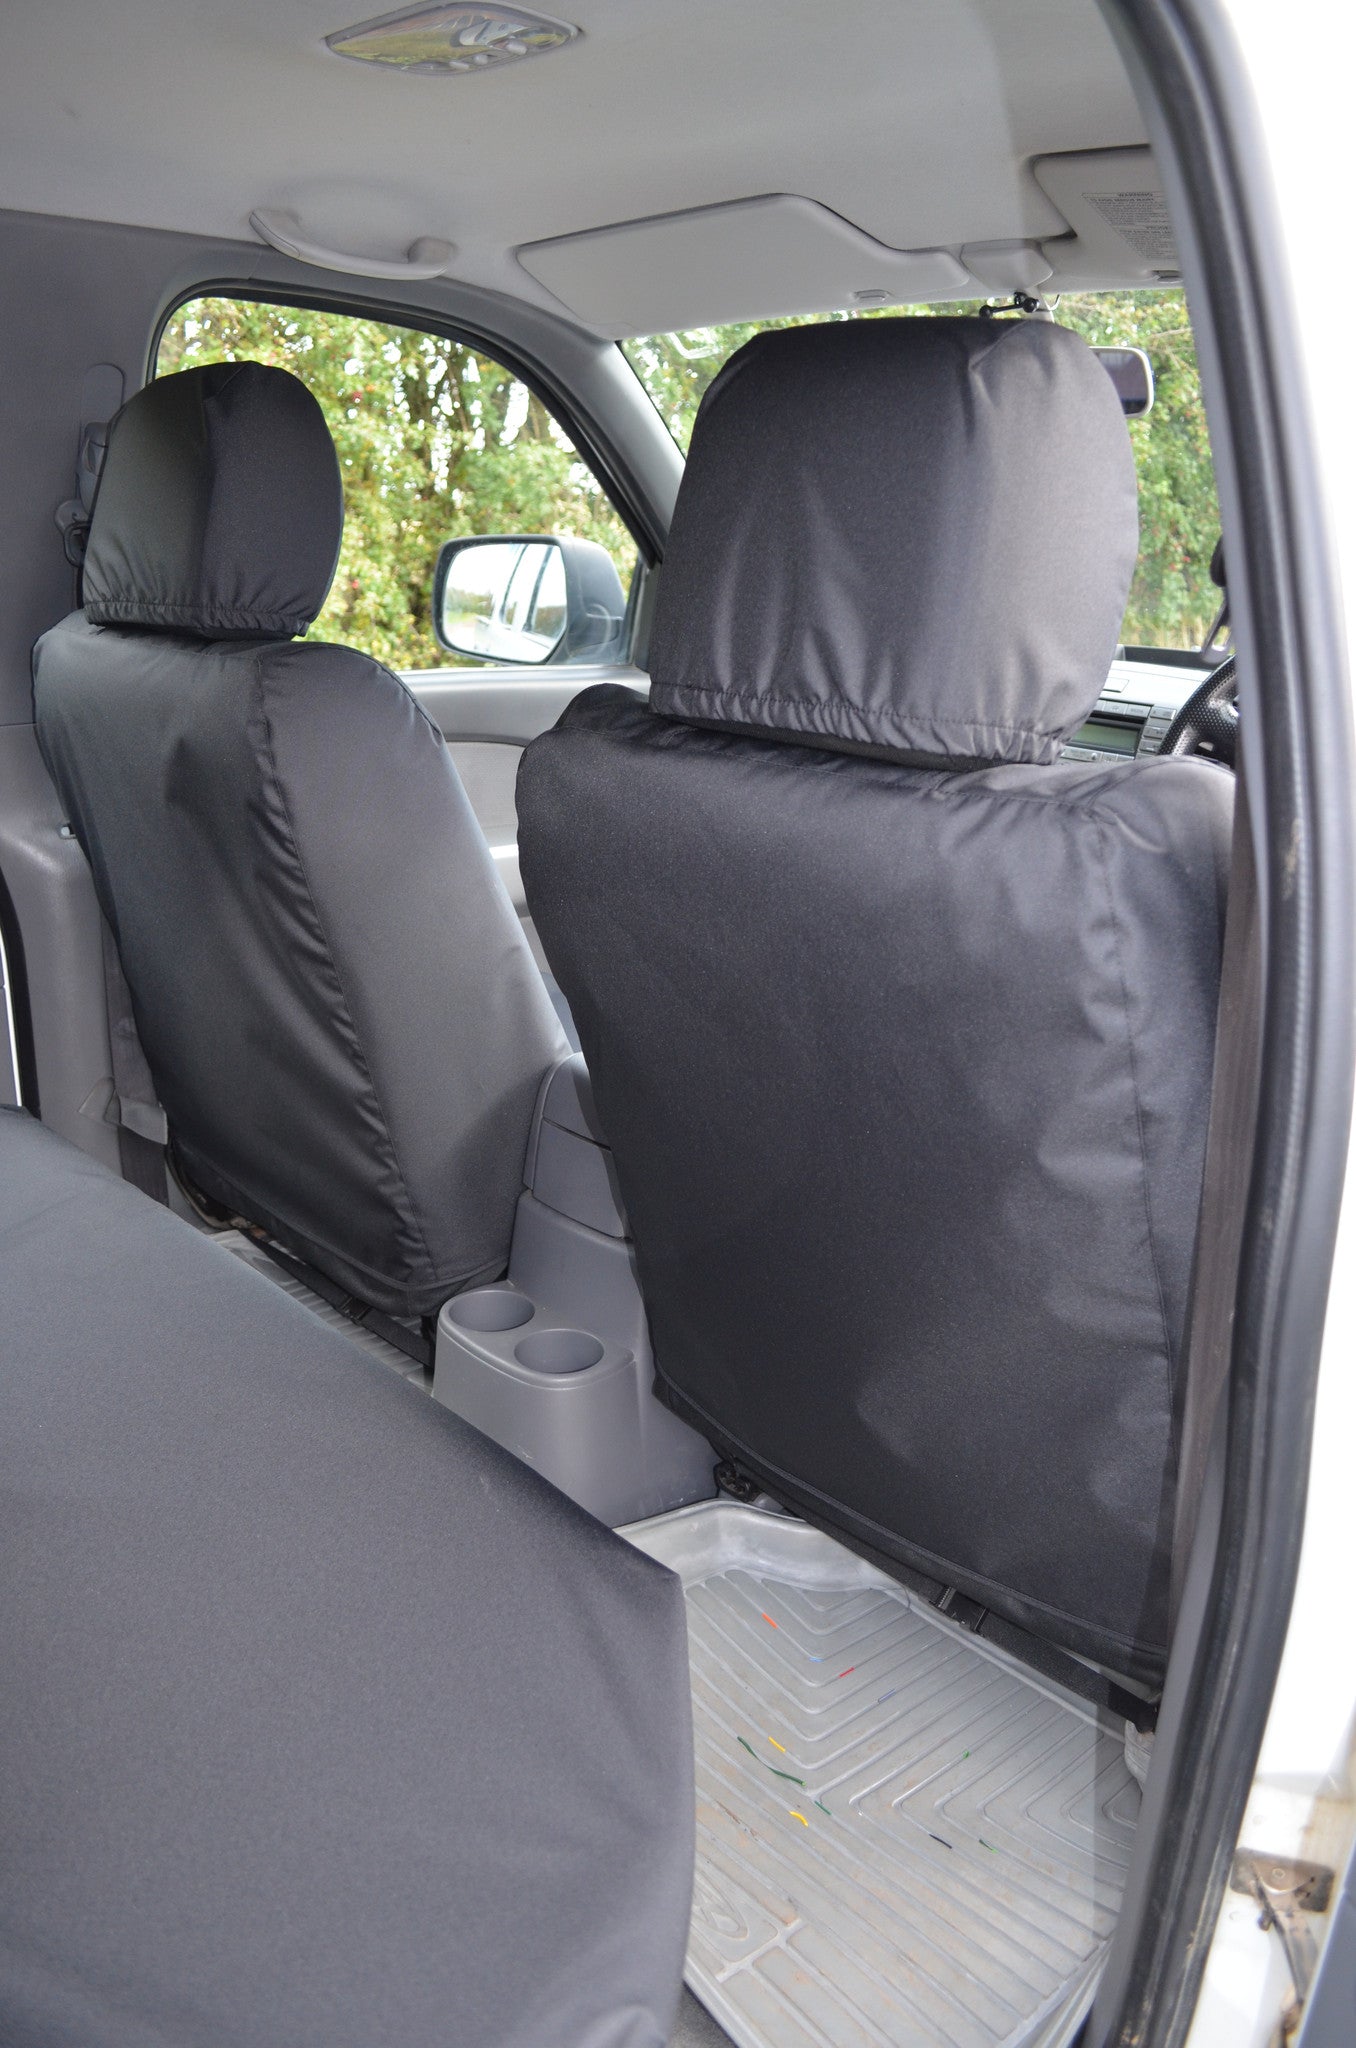 Ford Ranger 2006 to 2012 Seat Covers  Turtle Covers Ltd